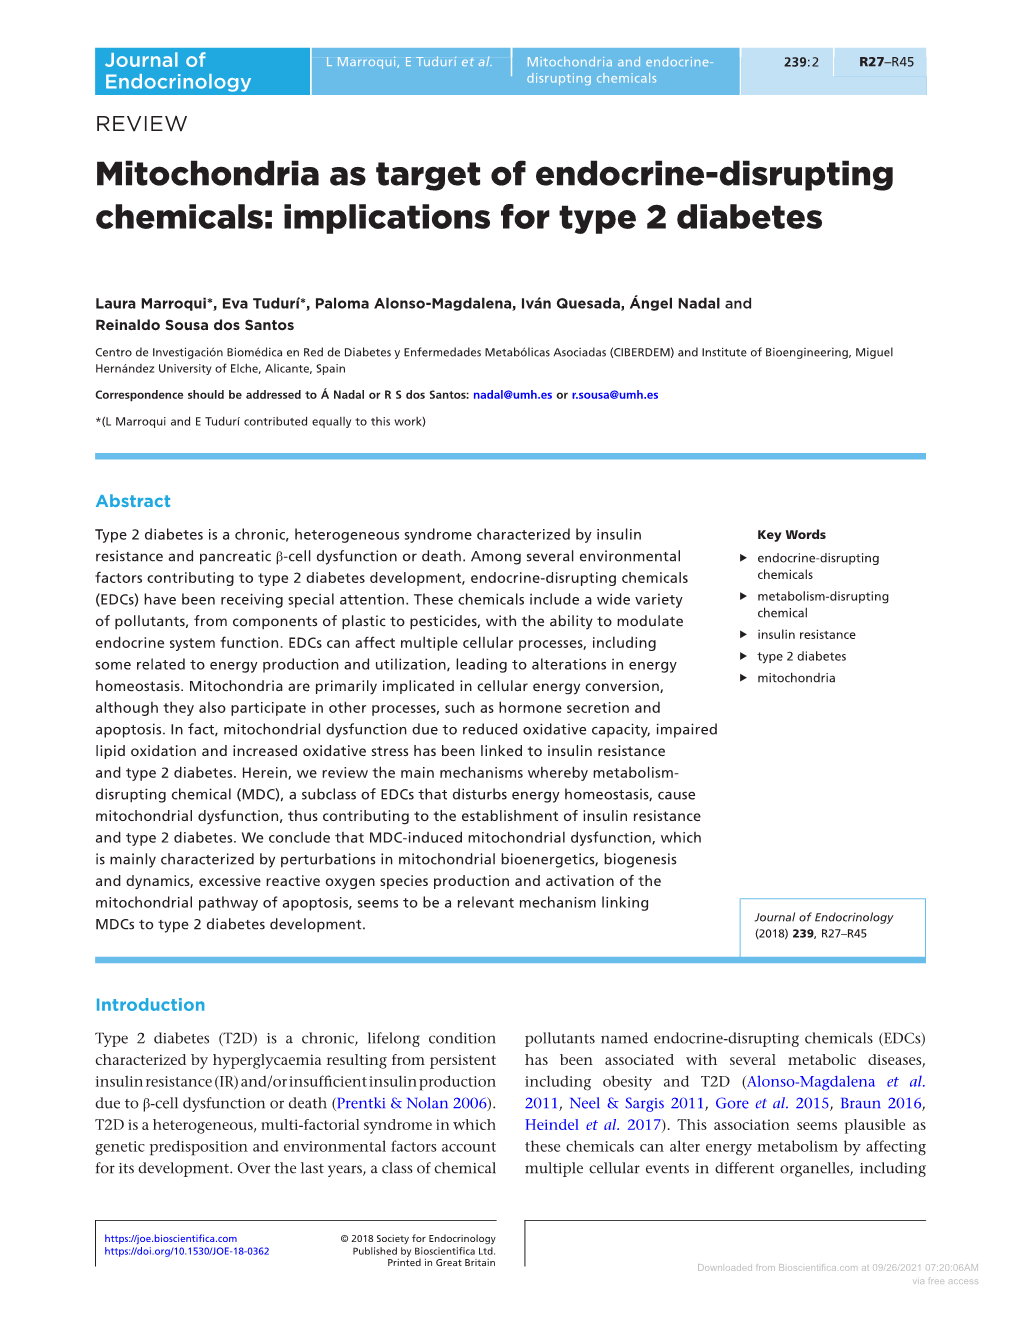 Mitochondria As Target of Endocrine-Disrupting Chemicals: Implications for Type 2 Diabetes